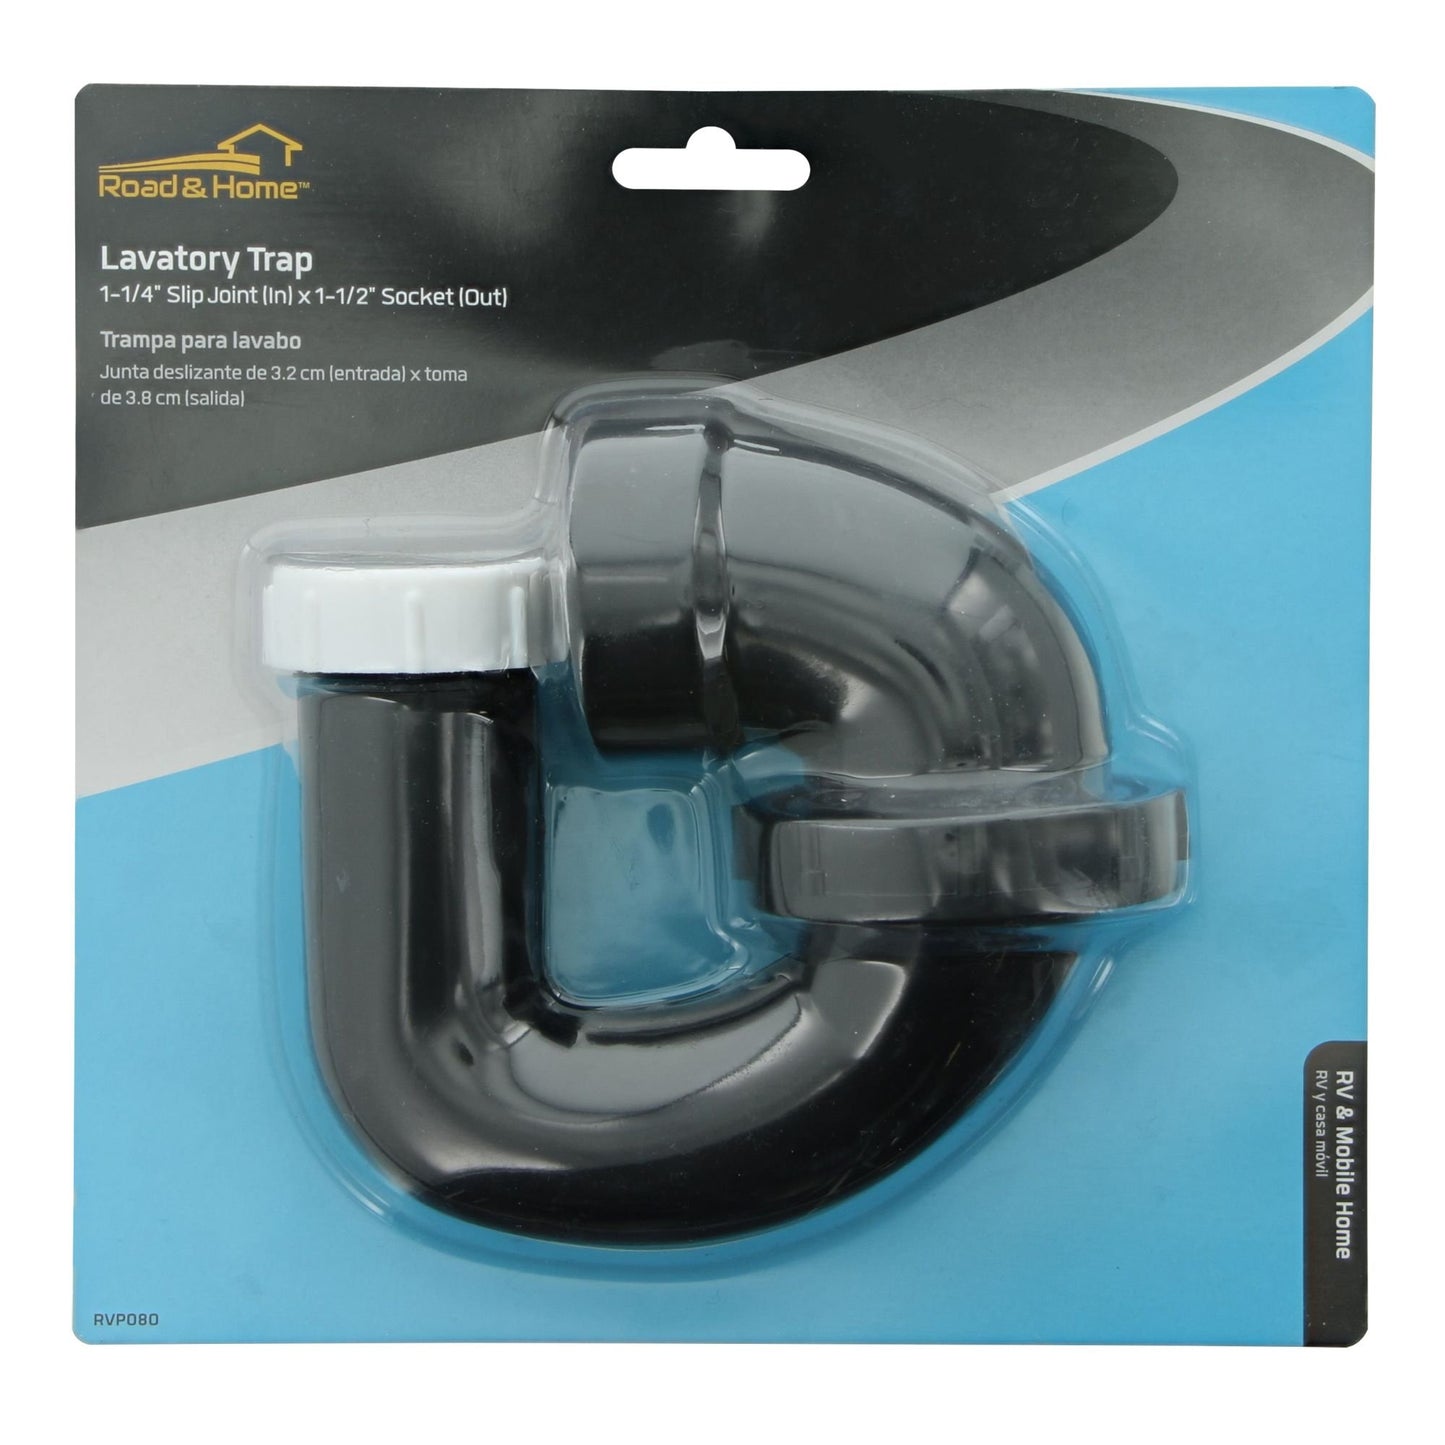 Road & Home RVP080 Lavatory Trap, 1 Pack